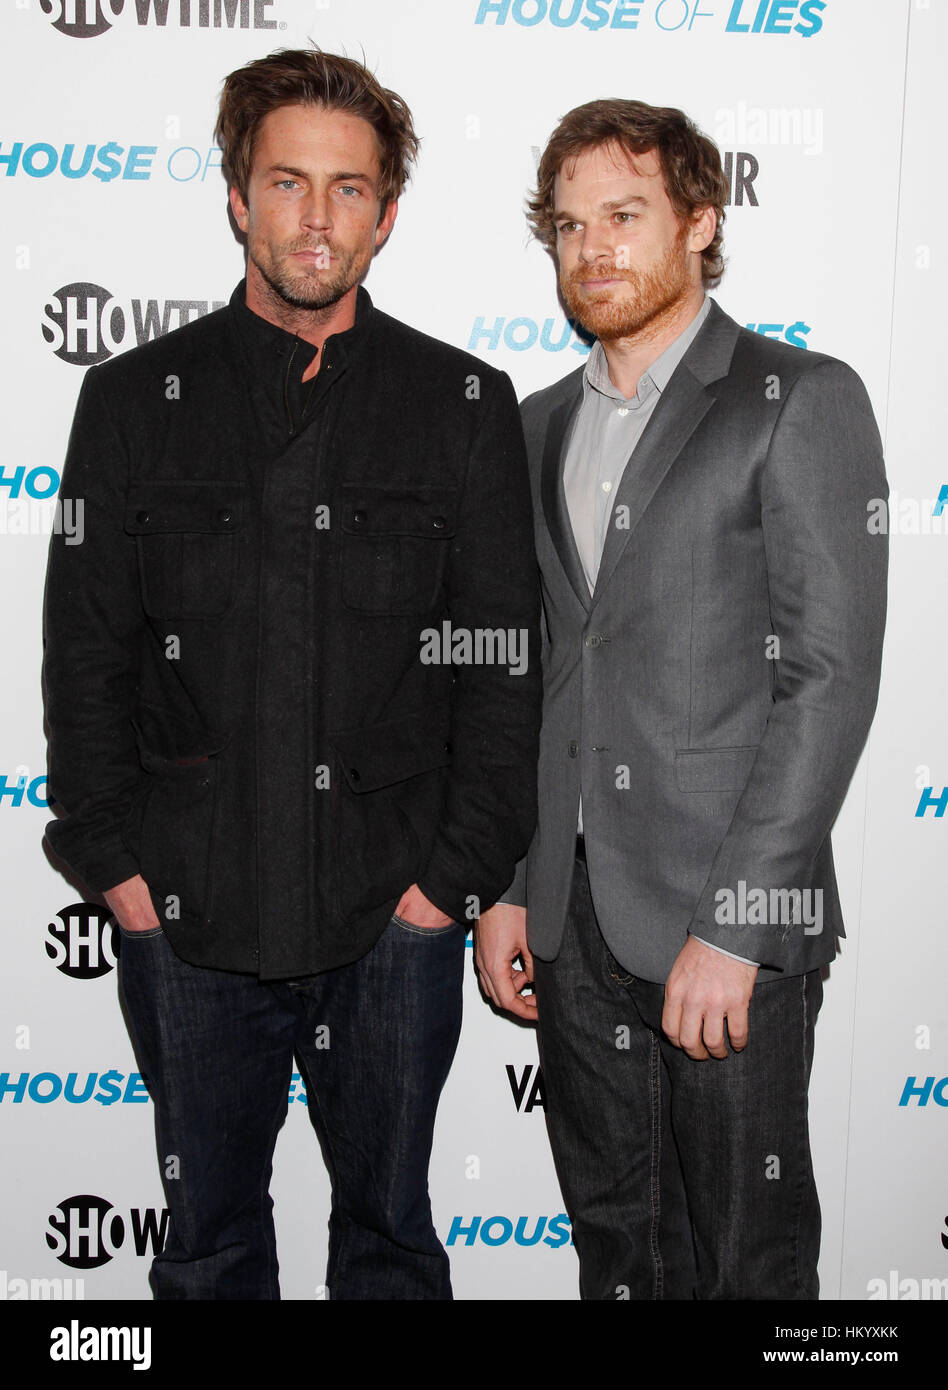 Michael C. Hall, right, and Desmond Harrington arrive at the Showtime  Premiere Party and Screening of